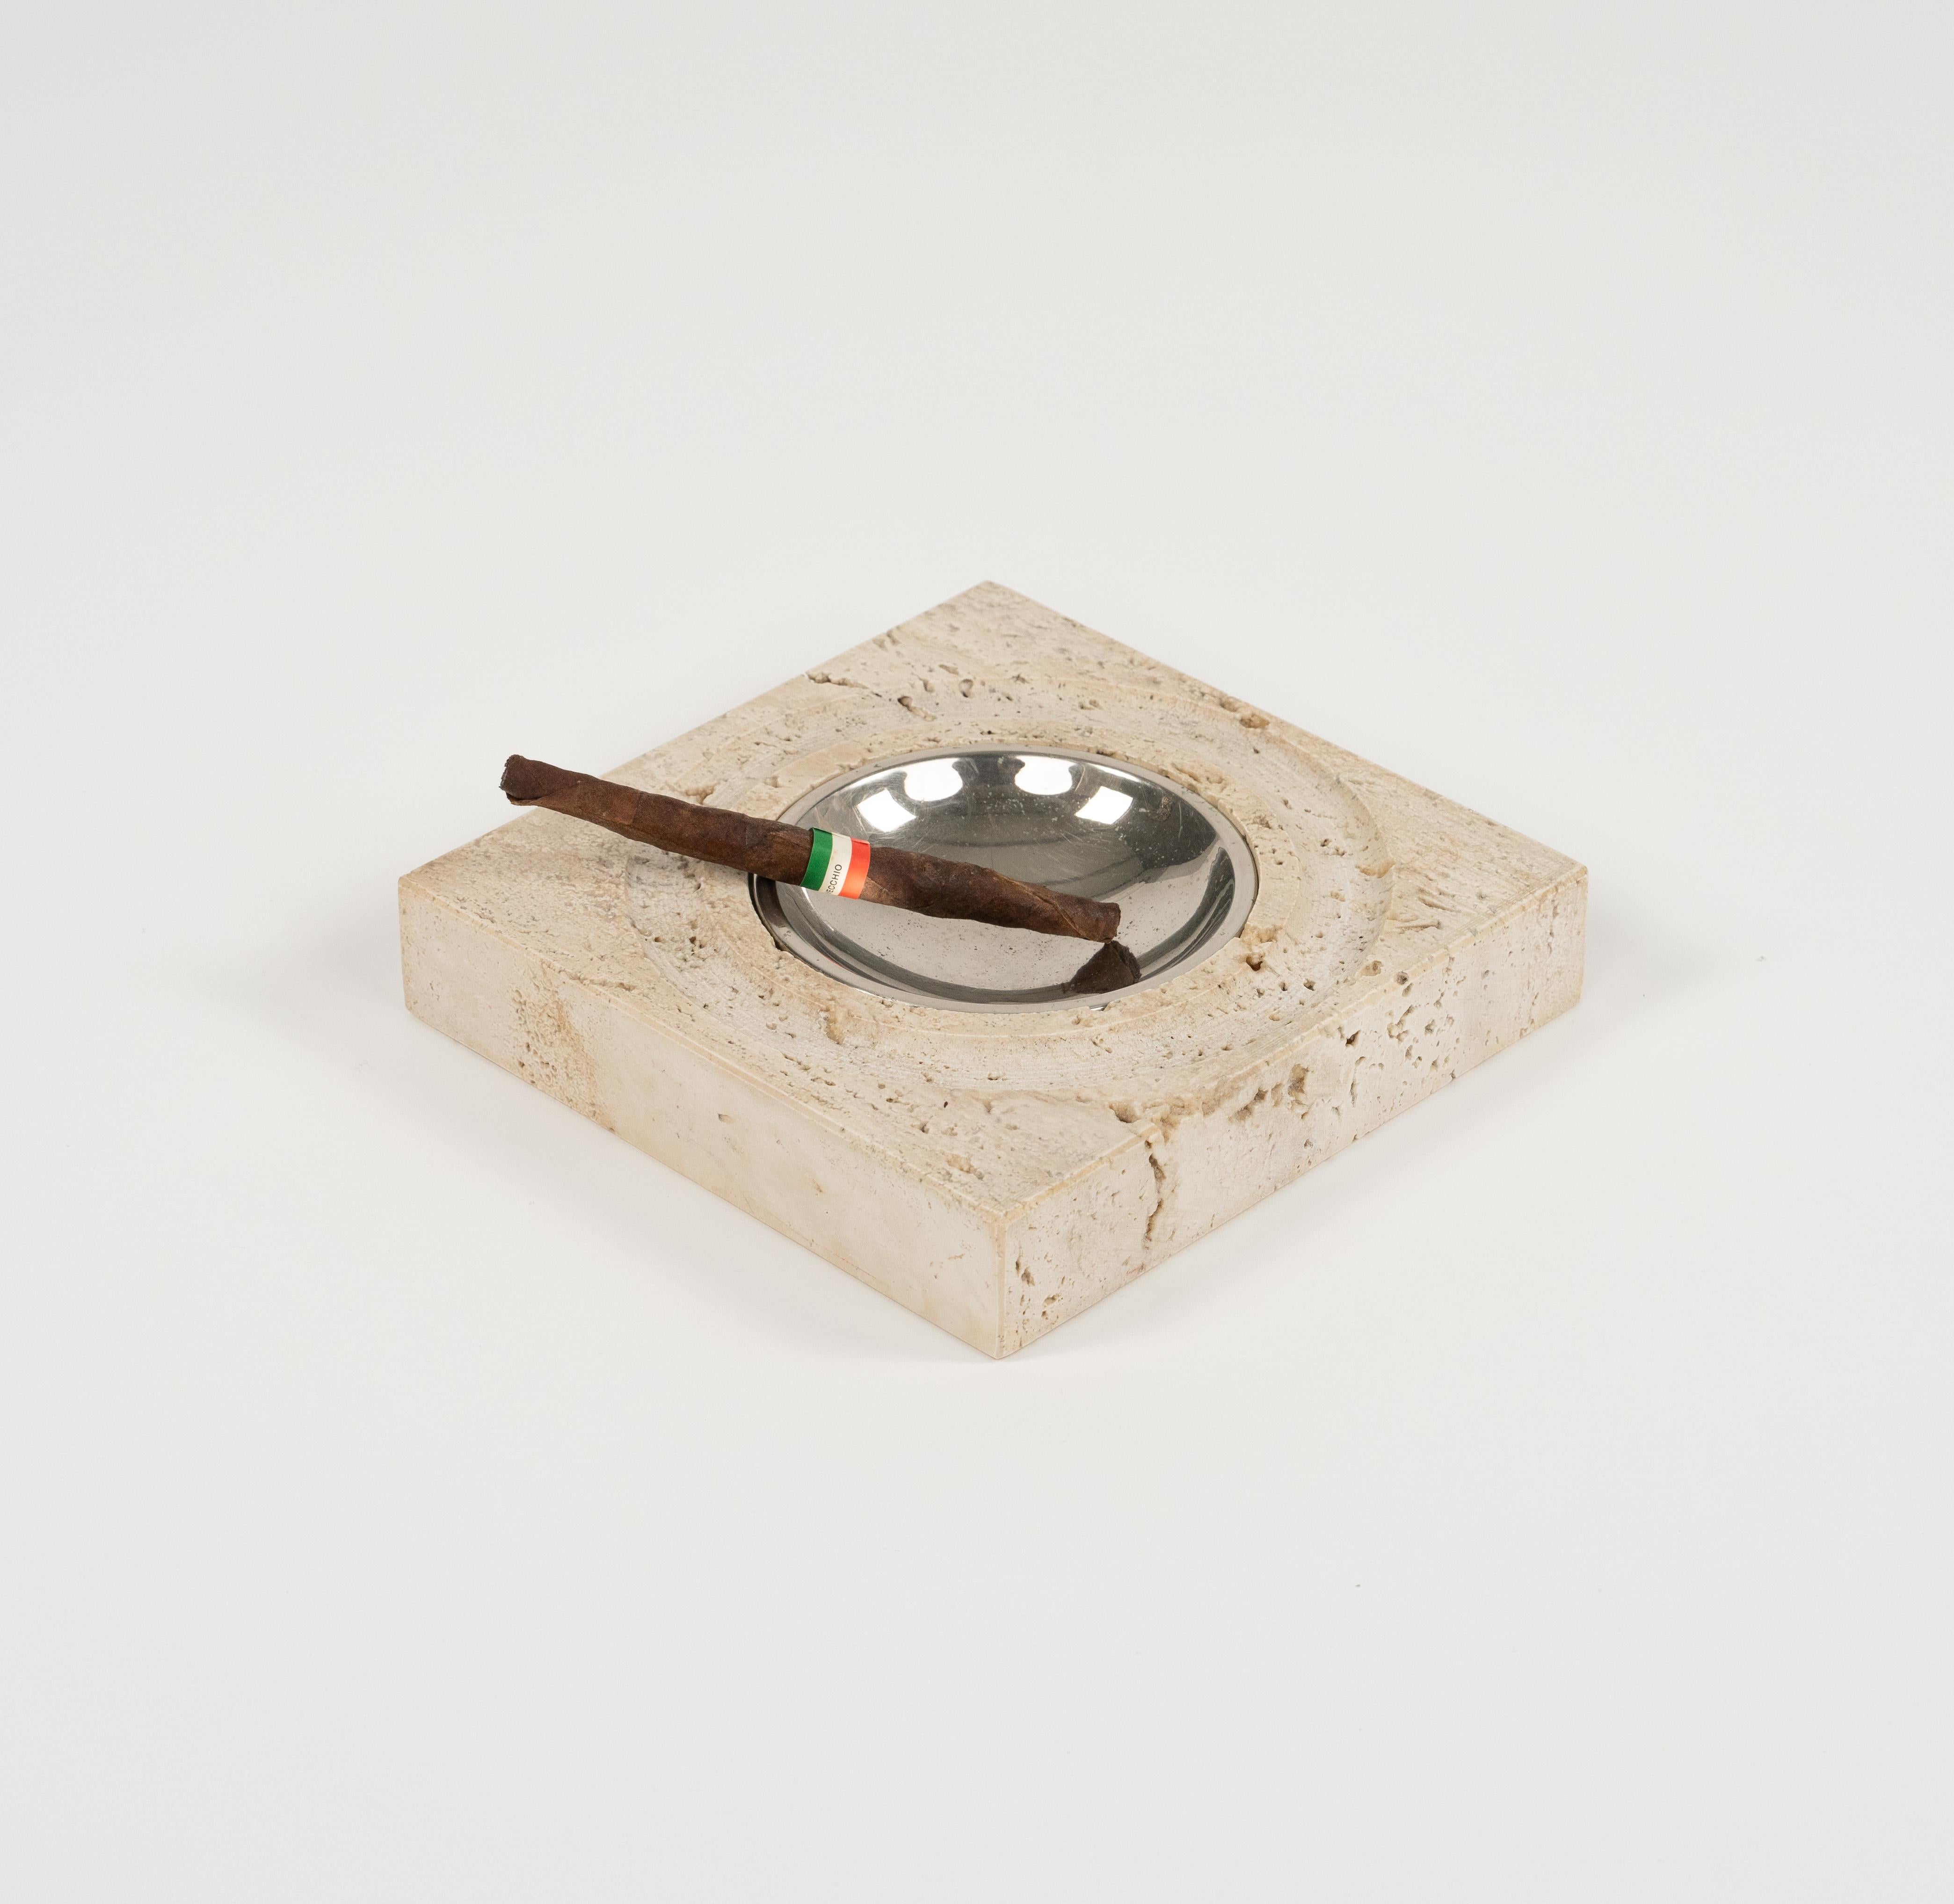 Italian Midcentury Travertine Ashtray or Vide-Poche by Fratelli Mannelli, Italy 1970s For Sale